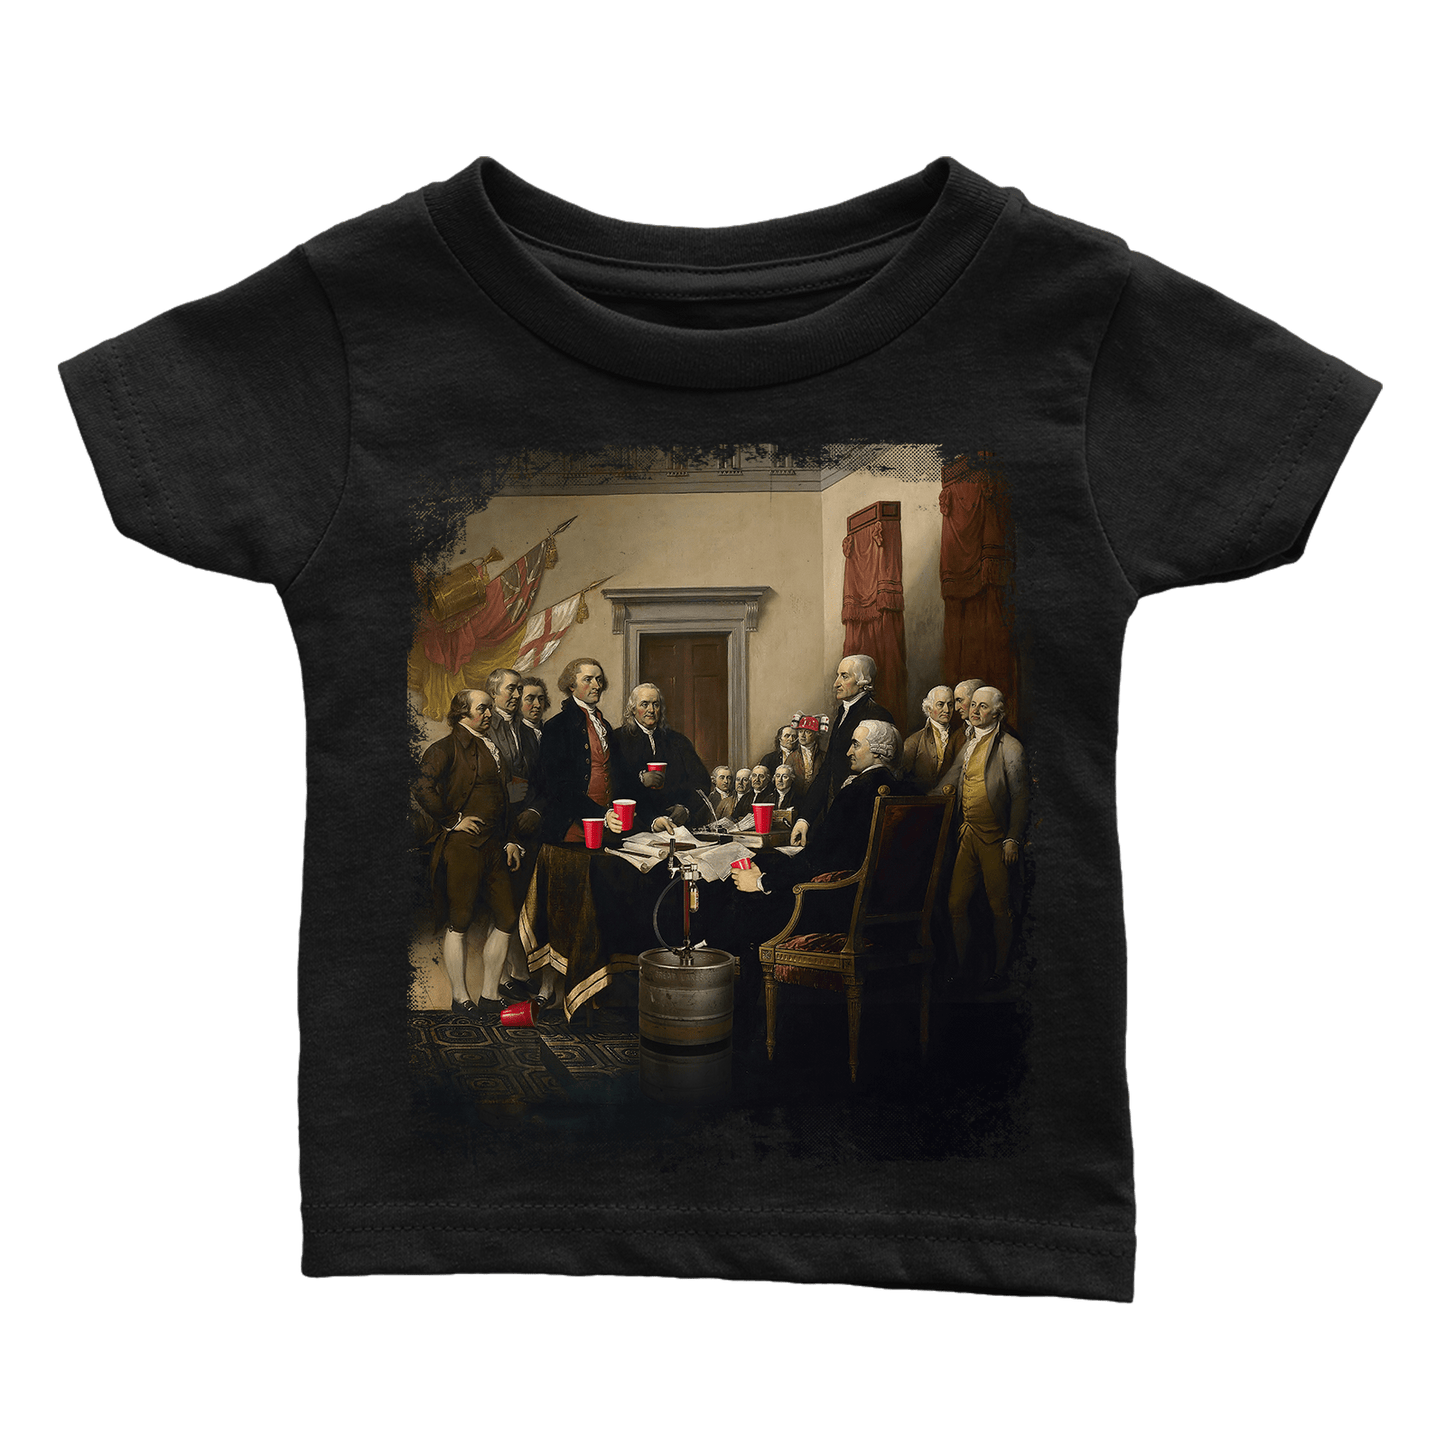 Apparel Premium Infant Shirt / Black / 6 Months Party Like Our Forefathers - Rugrats